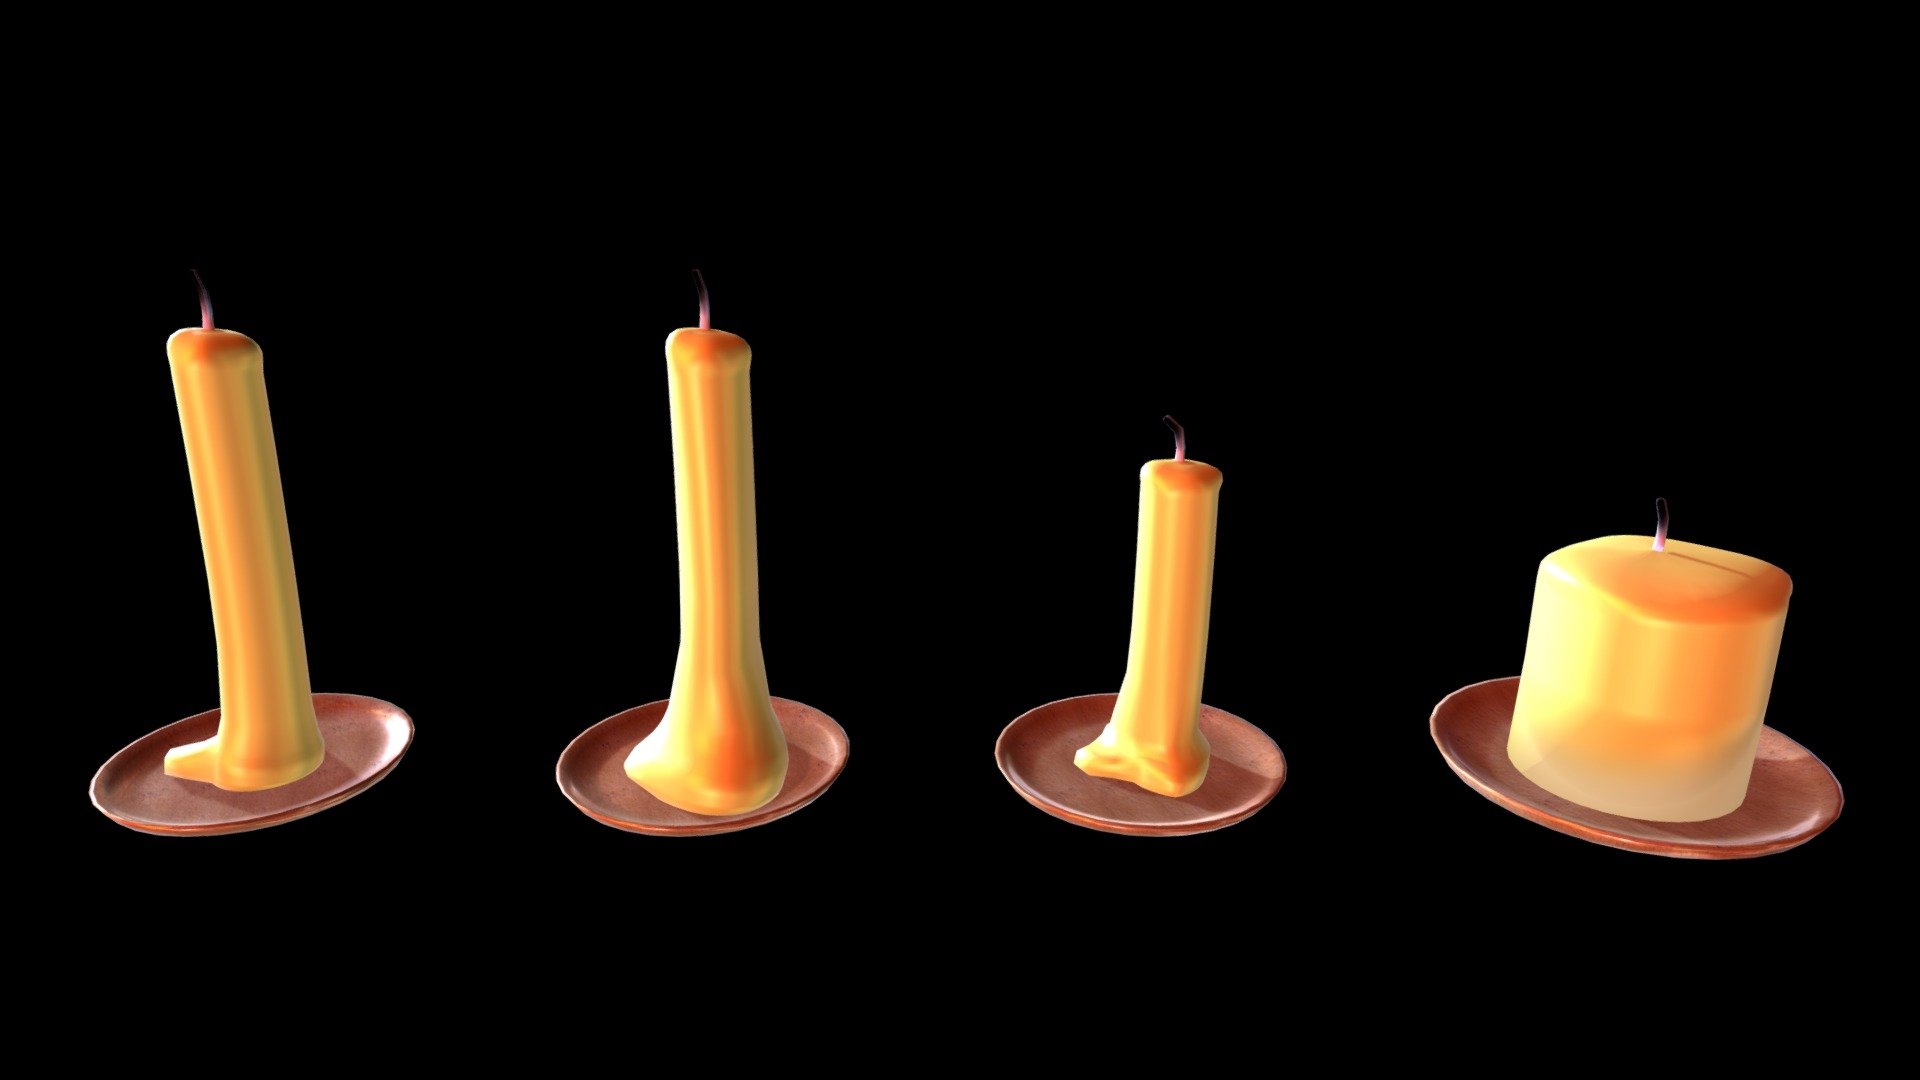 Some Candles made using Blender 2.79 and the Cycles render engine

Check out my blog at: https://rhcreations.tumblr.com/ - Candles - Download Free 3D model by rhcreations 3d model